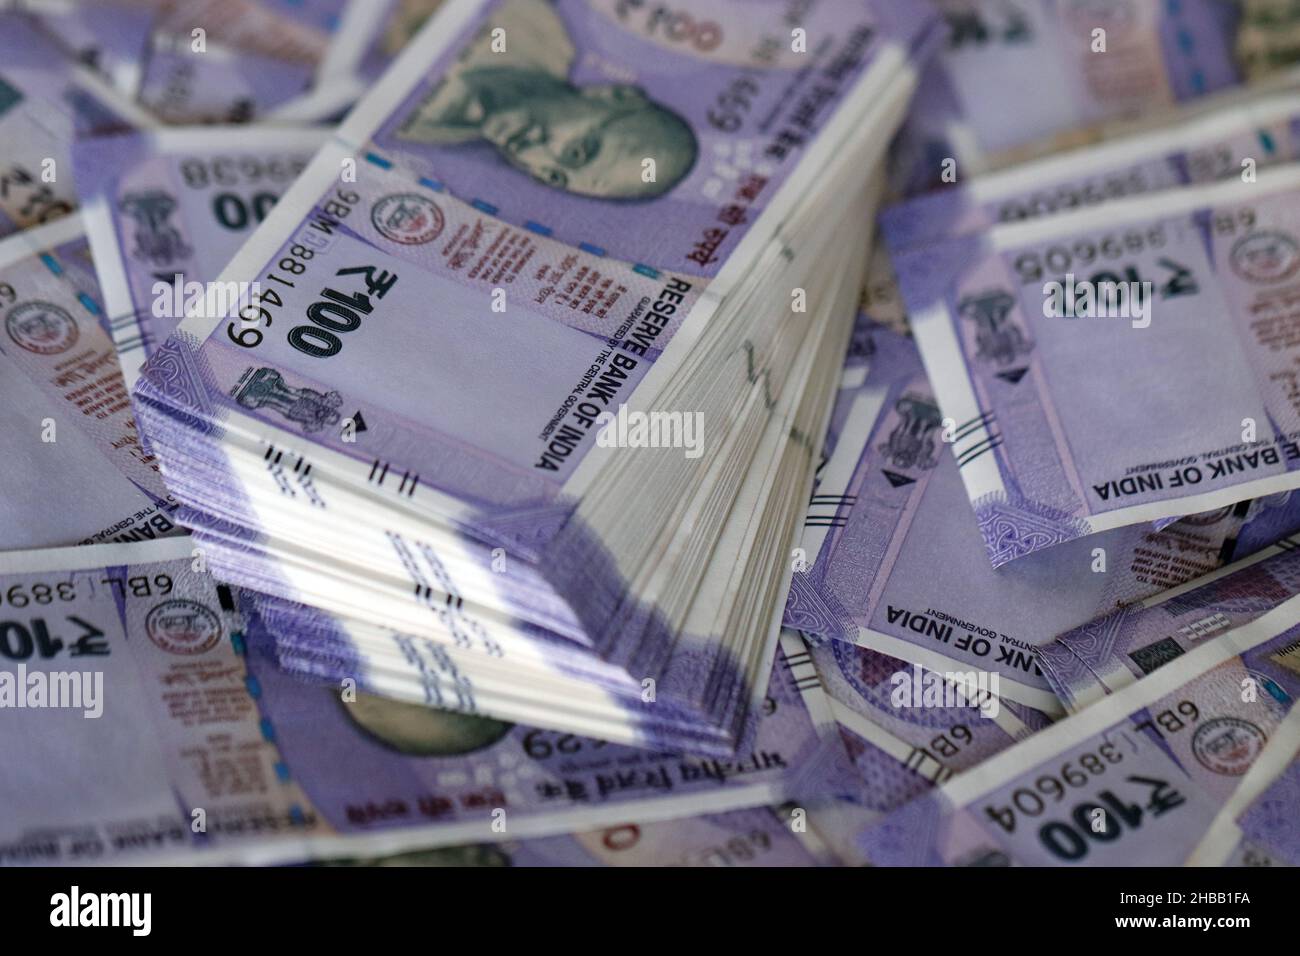 Stack of One hundred Indian rupee notes background, Indian currency bundle notes. Stock Photo